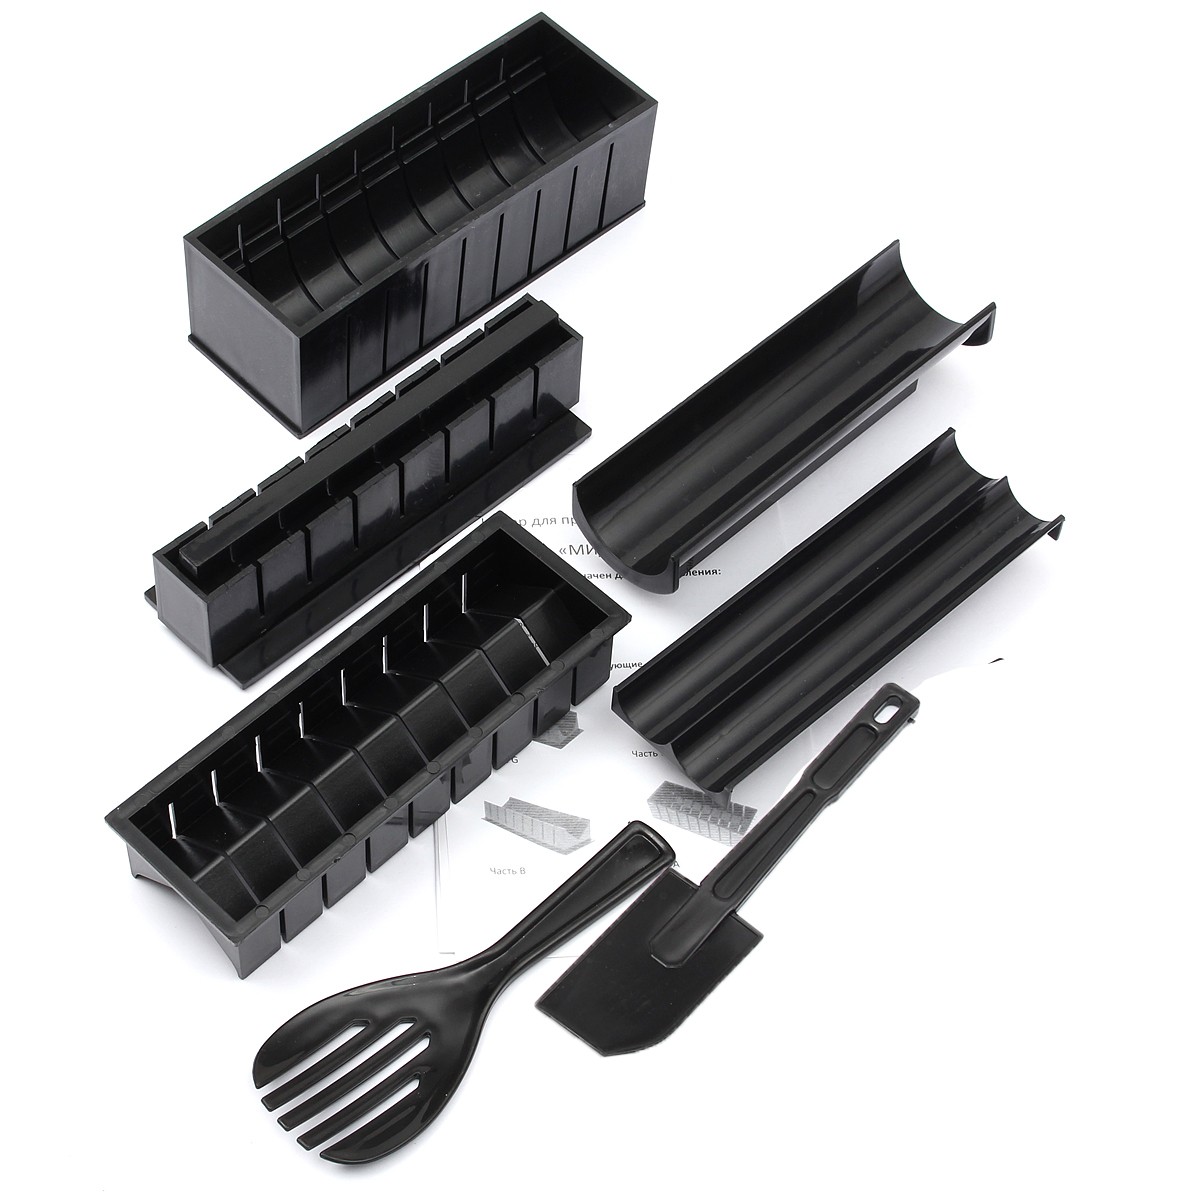 

11pcs Black DIY Sushi Maker Mold Rice Roll Cutting Mold Kitchen Cooking Tool